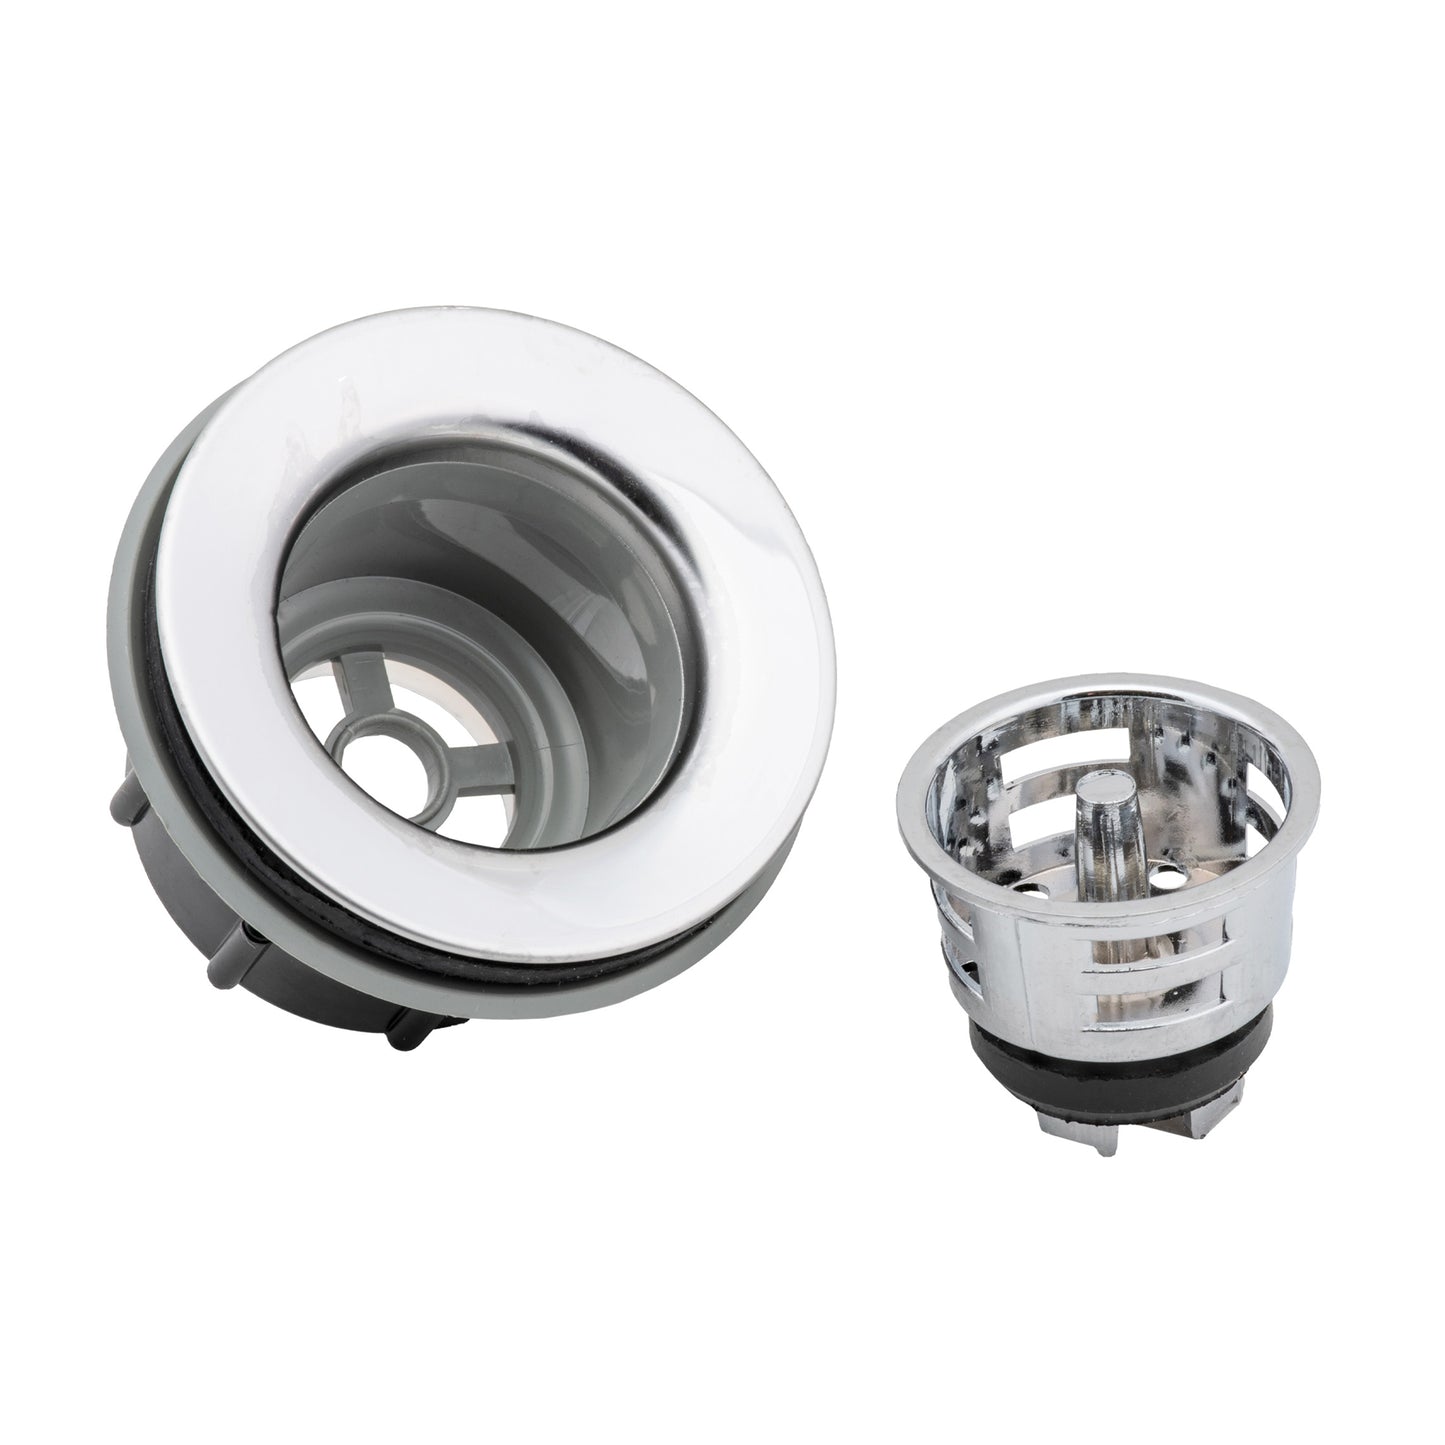 Sink Strainer Assembly